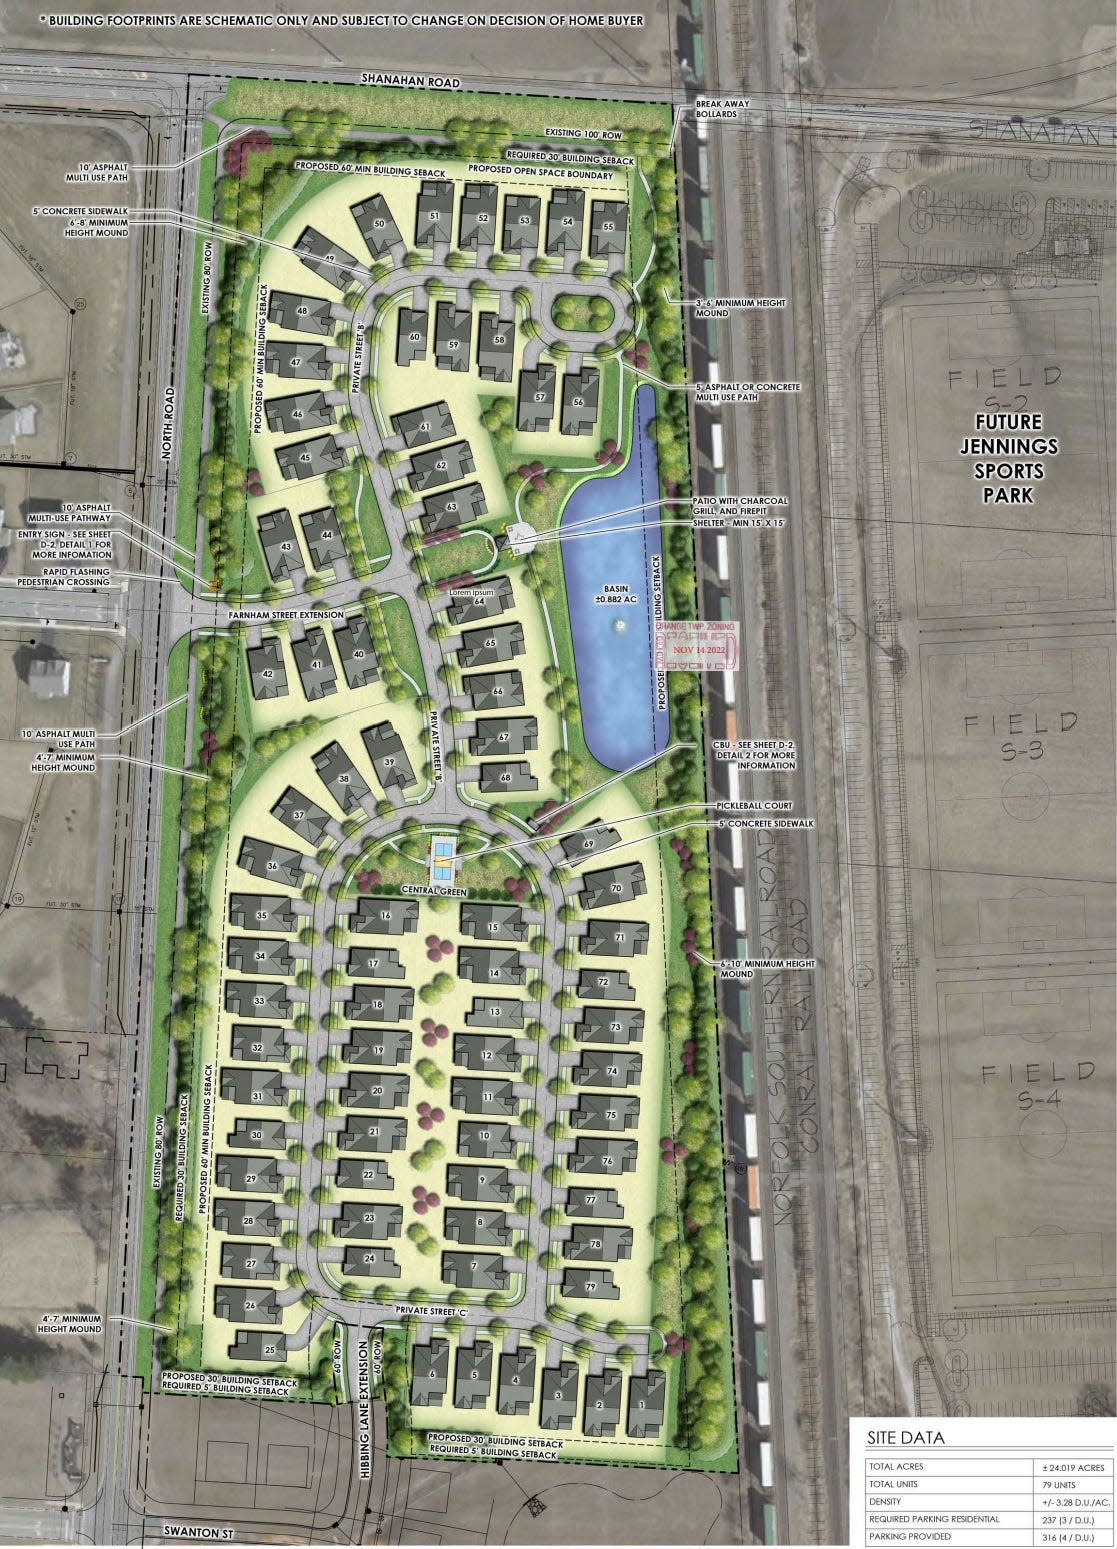 Aurora Farms is to  include 79 standalone condominiums, with prices starting at $350,000 each, on 24 acres at the corner of North and Shanahan roads. Shanahan Road is shown at the top in this image.